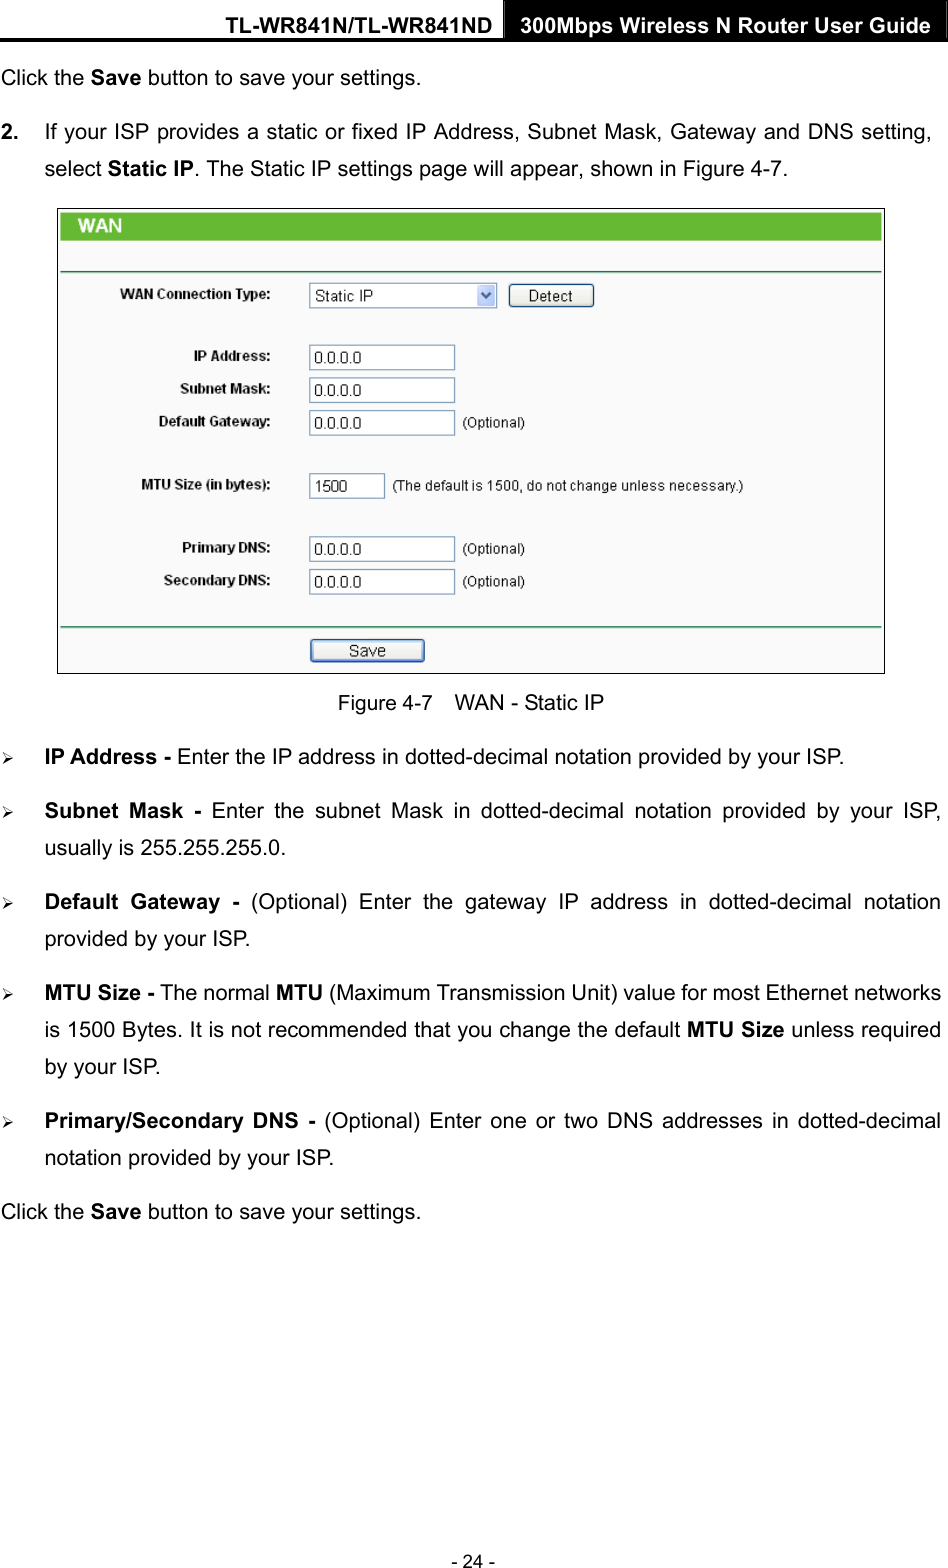 TL-WR841N/TL-WR841ND 300Mbps Wireless N Router User Guide - 24 - Click the Save button to save your settings. 2.  If your ISP provides a static or fixed IP Address, Subnet Mask, Gateway and DNS setting, select Static IP. The Static IP settings page will appear, shown in Figure 4-7.  Figure 4-7    WAN - Static IP ¾ IP Address - Enter the IP address in dotted-decimal notation provided by your ISP. ¾ Subnet Mask - Enter the subnet Mask in dotted-decimal notation provided by your ISP, usually is 255.255.255.0. ¾ Default Gateway - (Optional) Enter the gateway IP address in dotted-decimal notation provided by your ISP. ¾ MTU Size - The normal MTU (Maximum Transmission Unit) value for most Ethernet networks is 1500 Bytes. It is not recommended that you change the default MTU Size unless required by your ISP.   ¾ Primary/Secondary DNS - (Optional) Enter one or two DNS addresses in dotted-decimal notation provided by your ISP. Click the Save button to save your settings. 